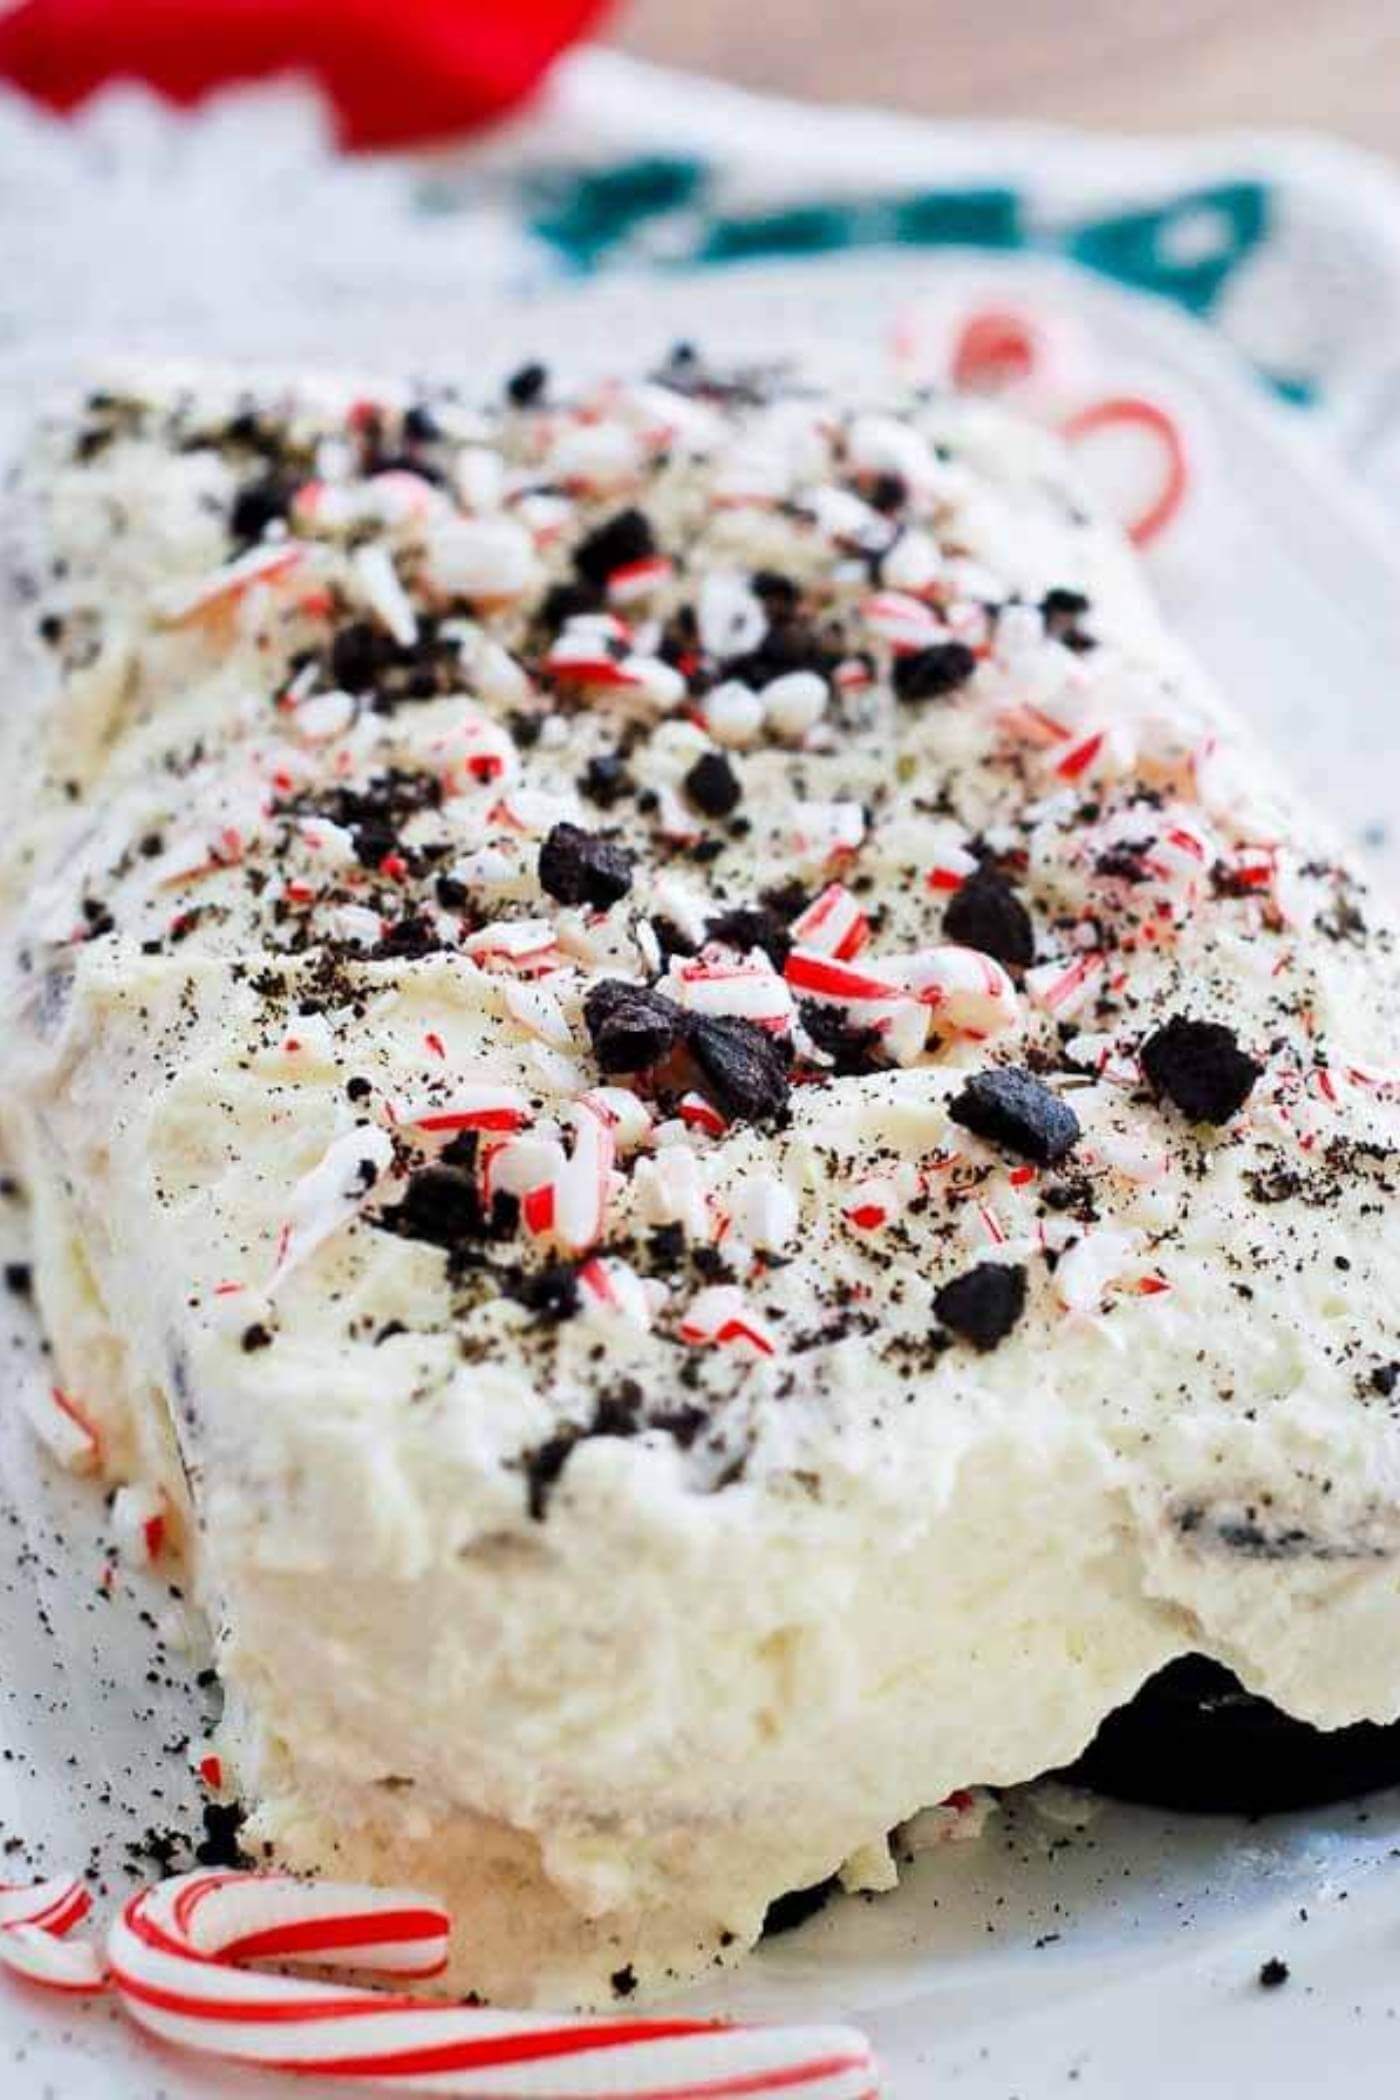 chocolate and peppermint icebox cake on plate with candy canes.